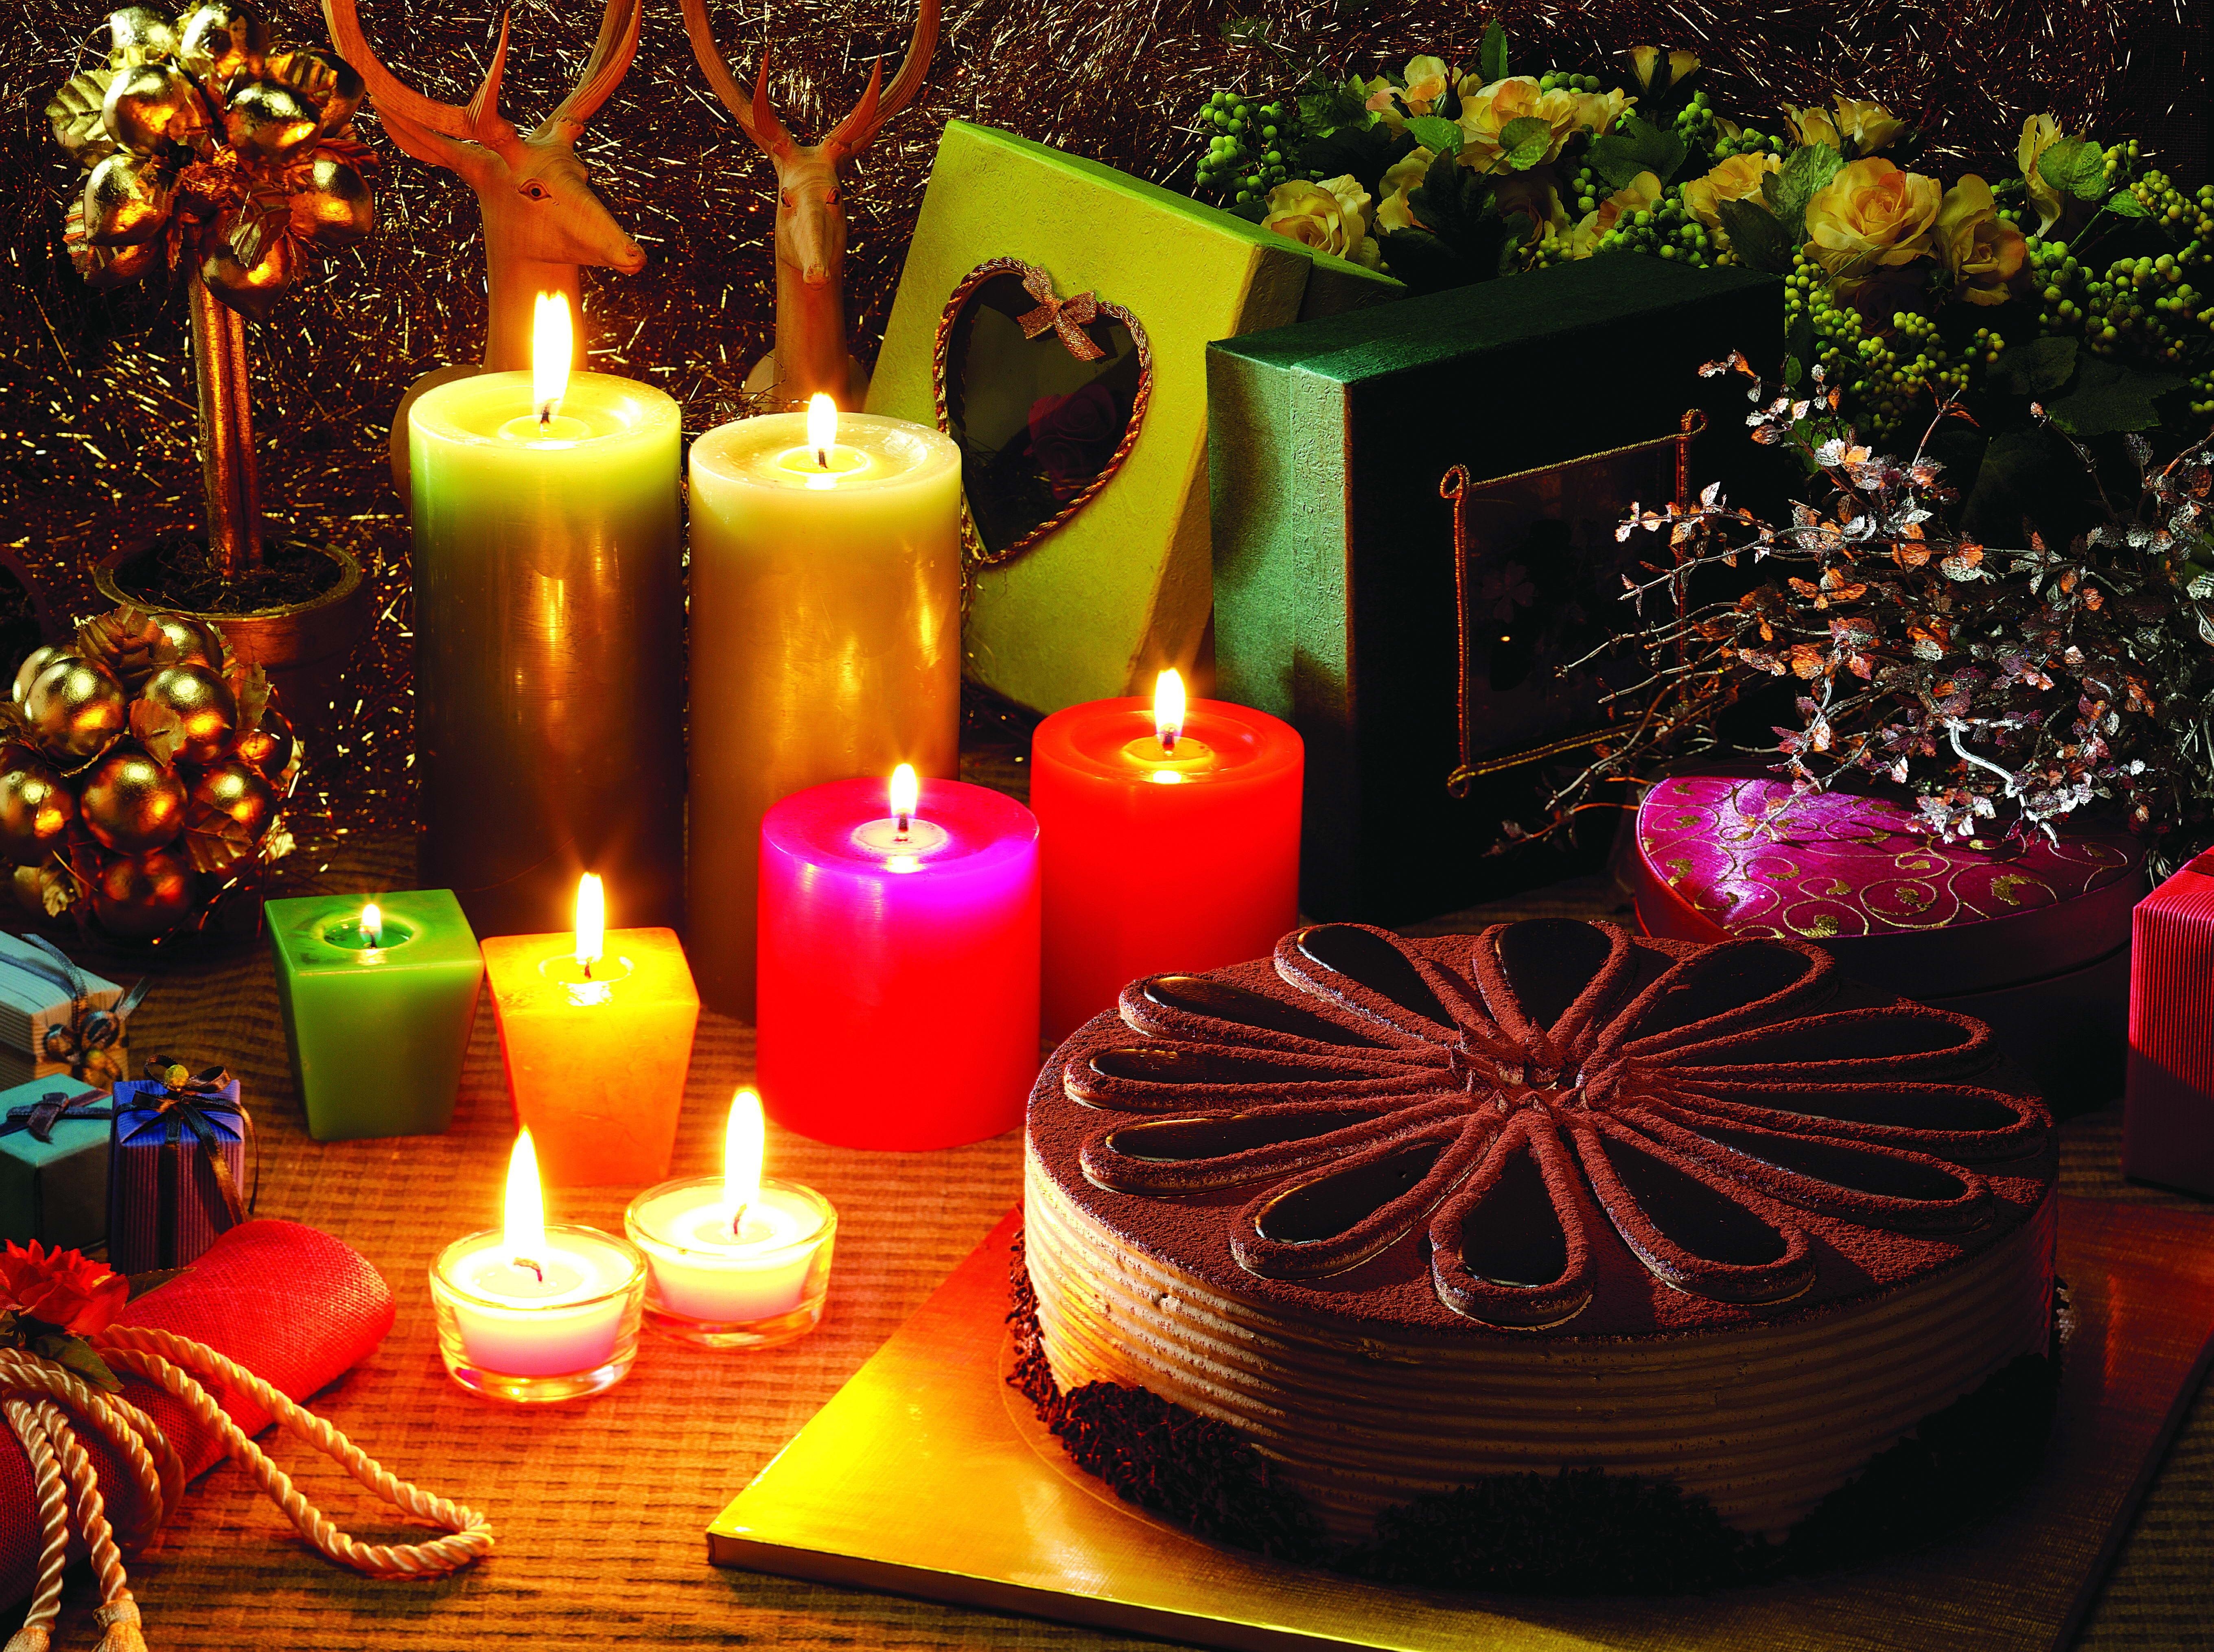 cake, holidays, deers, holiday, presents, gifts, christmas candles, new year's candles cell phone wallpapers